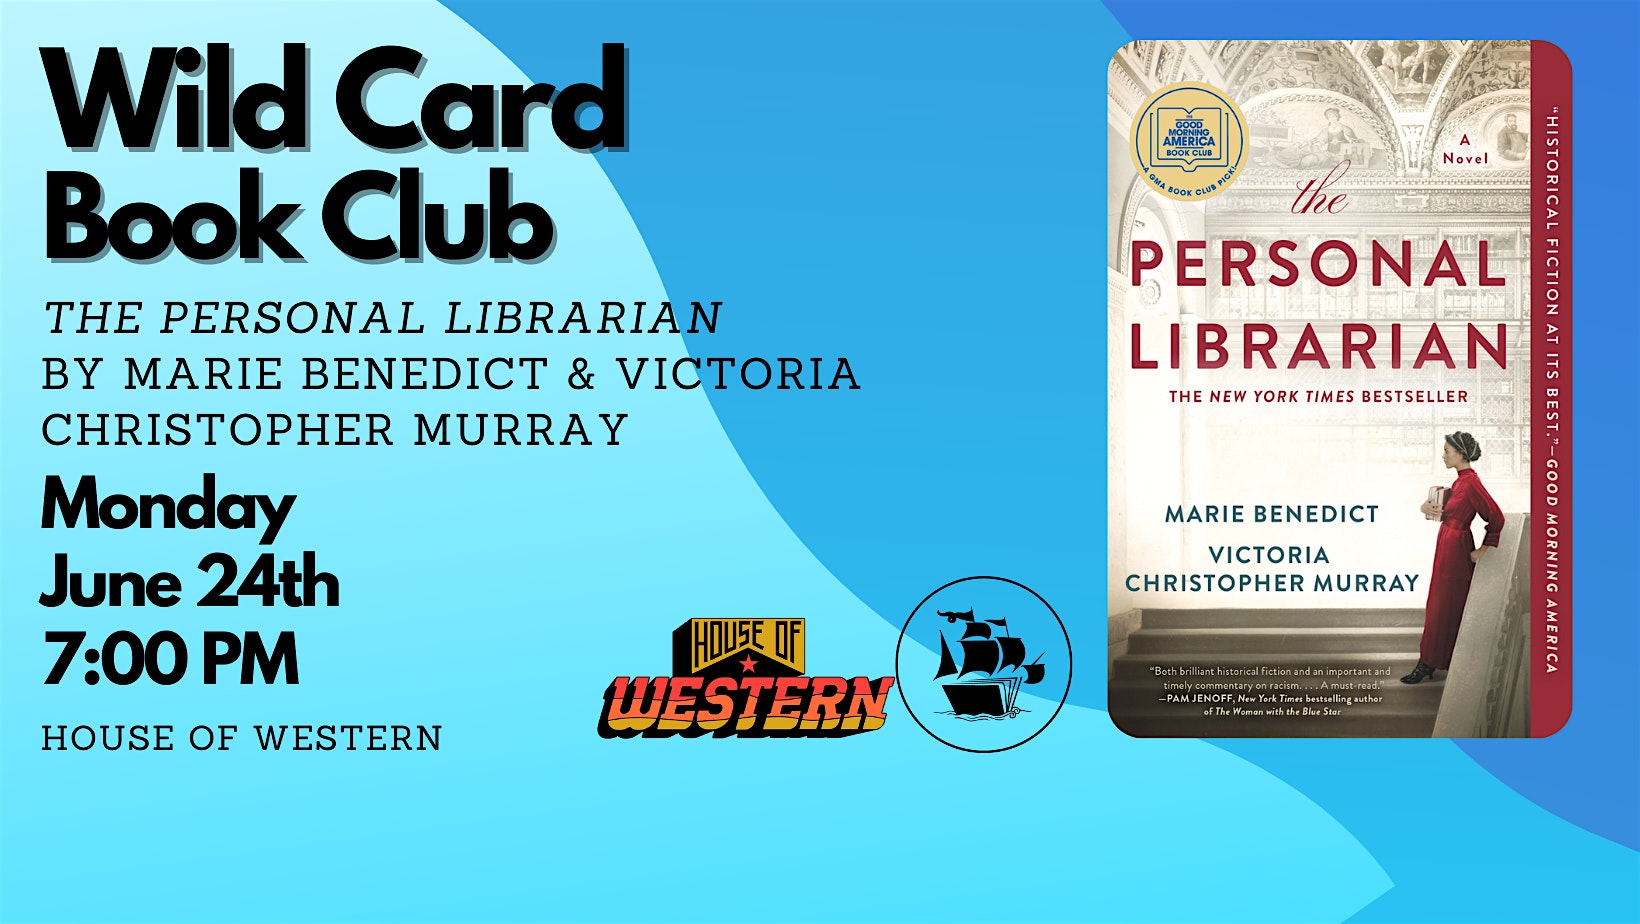 Wild Card Book Club - The Personal Librarian by Marie Benedict